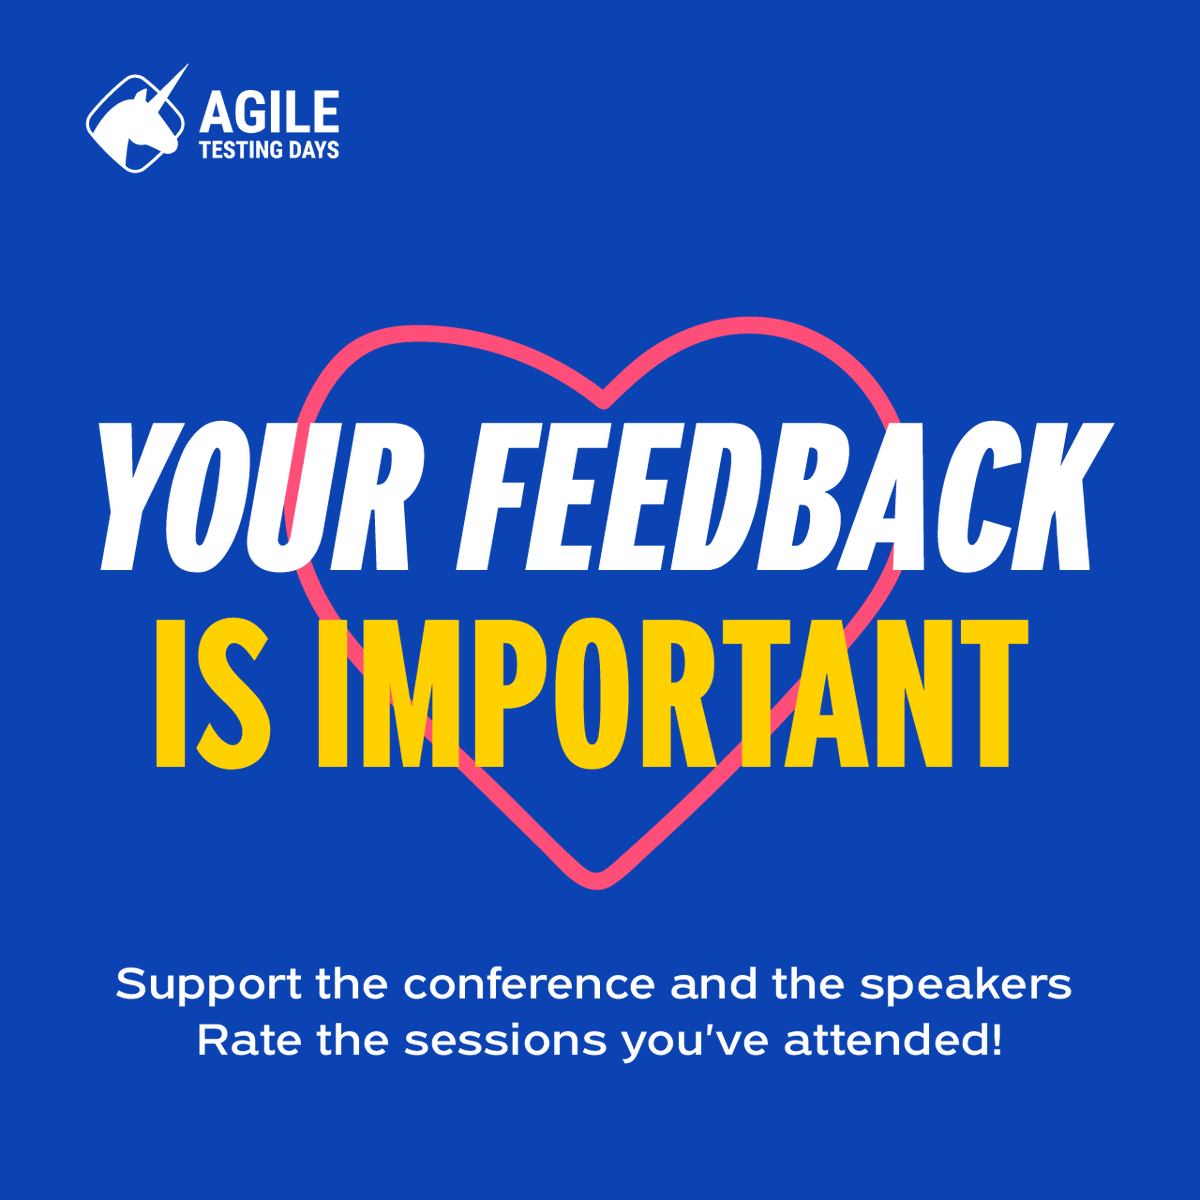 What an incredible day at #AgileTD! Please take a moment to rate the sessions you've attended. Our speakers will greatly appreciate your feedback! bit.ly/476R2as